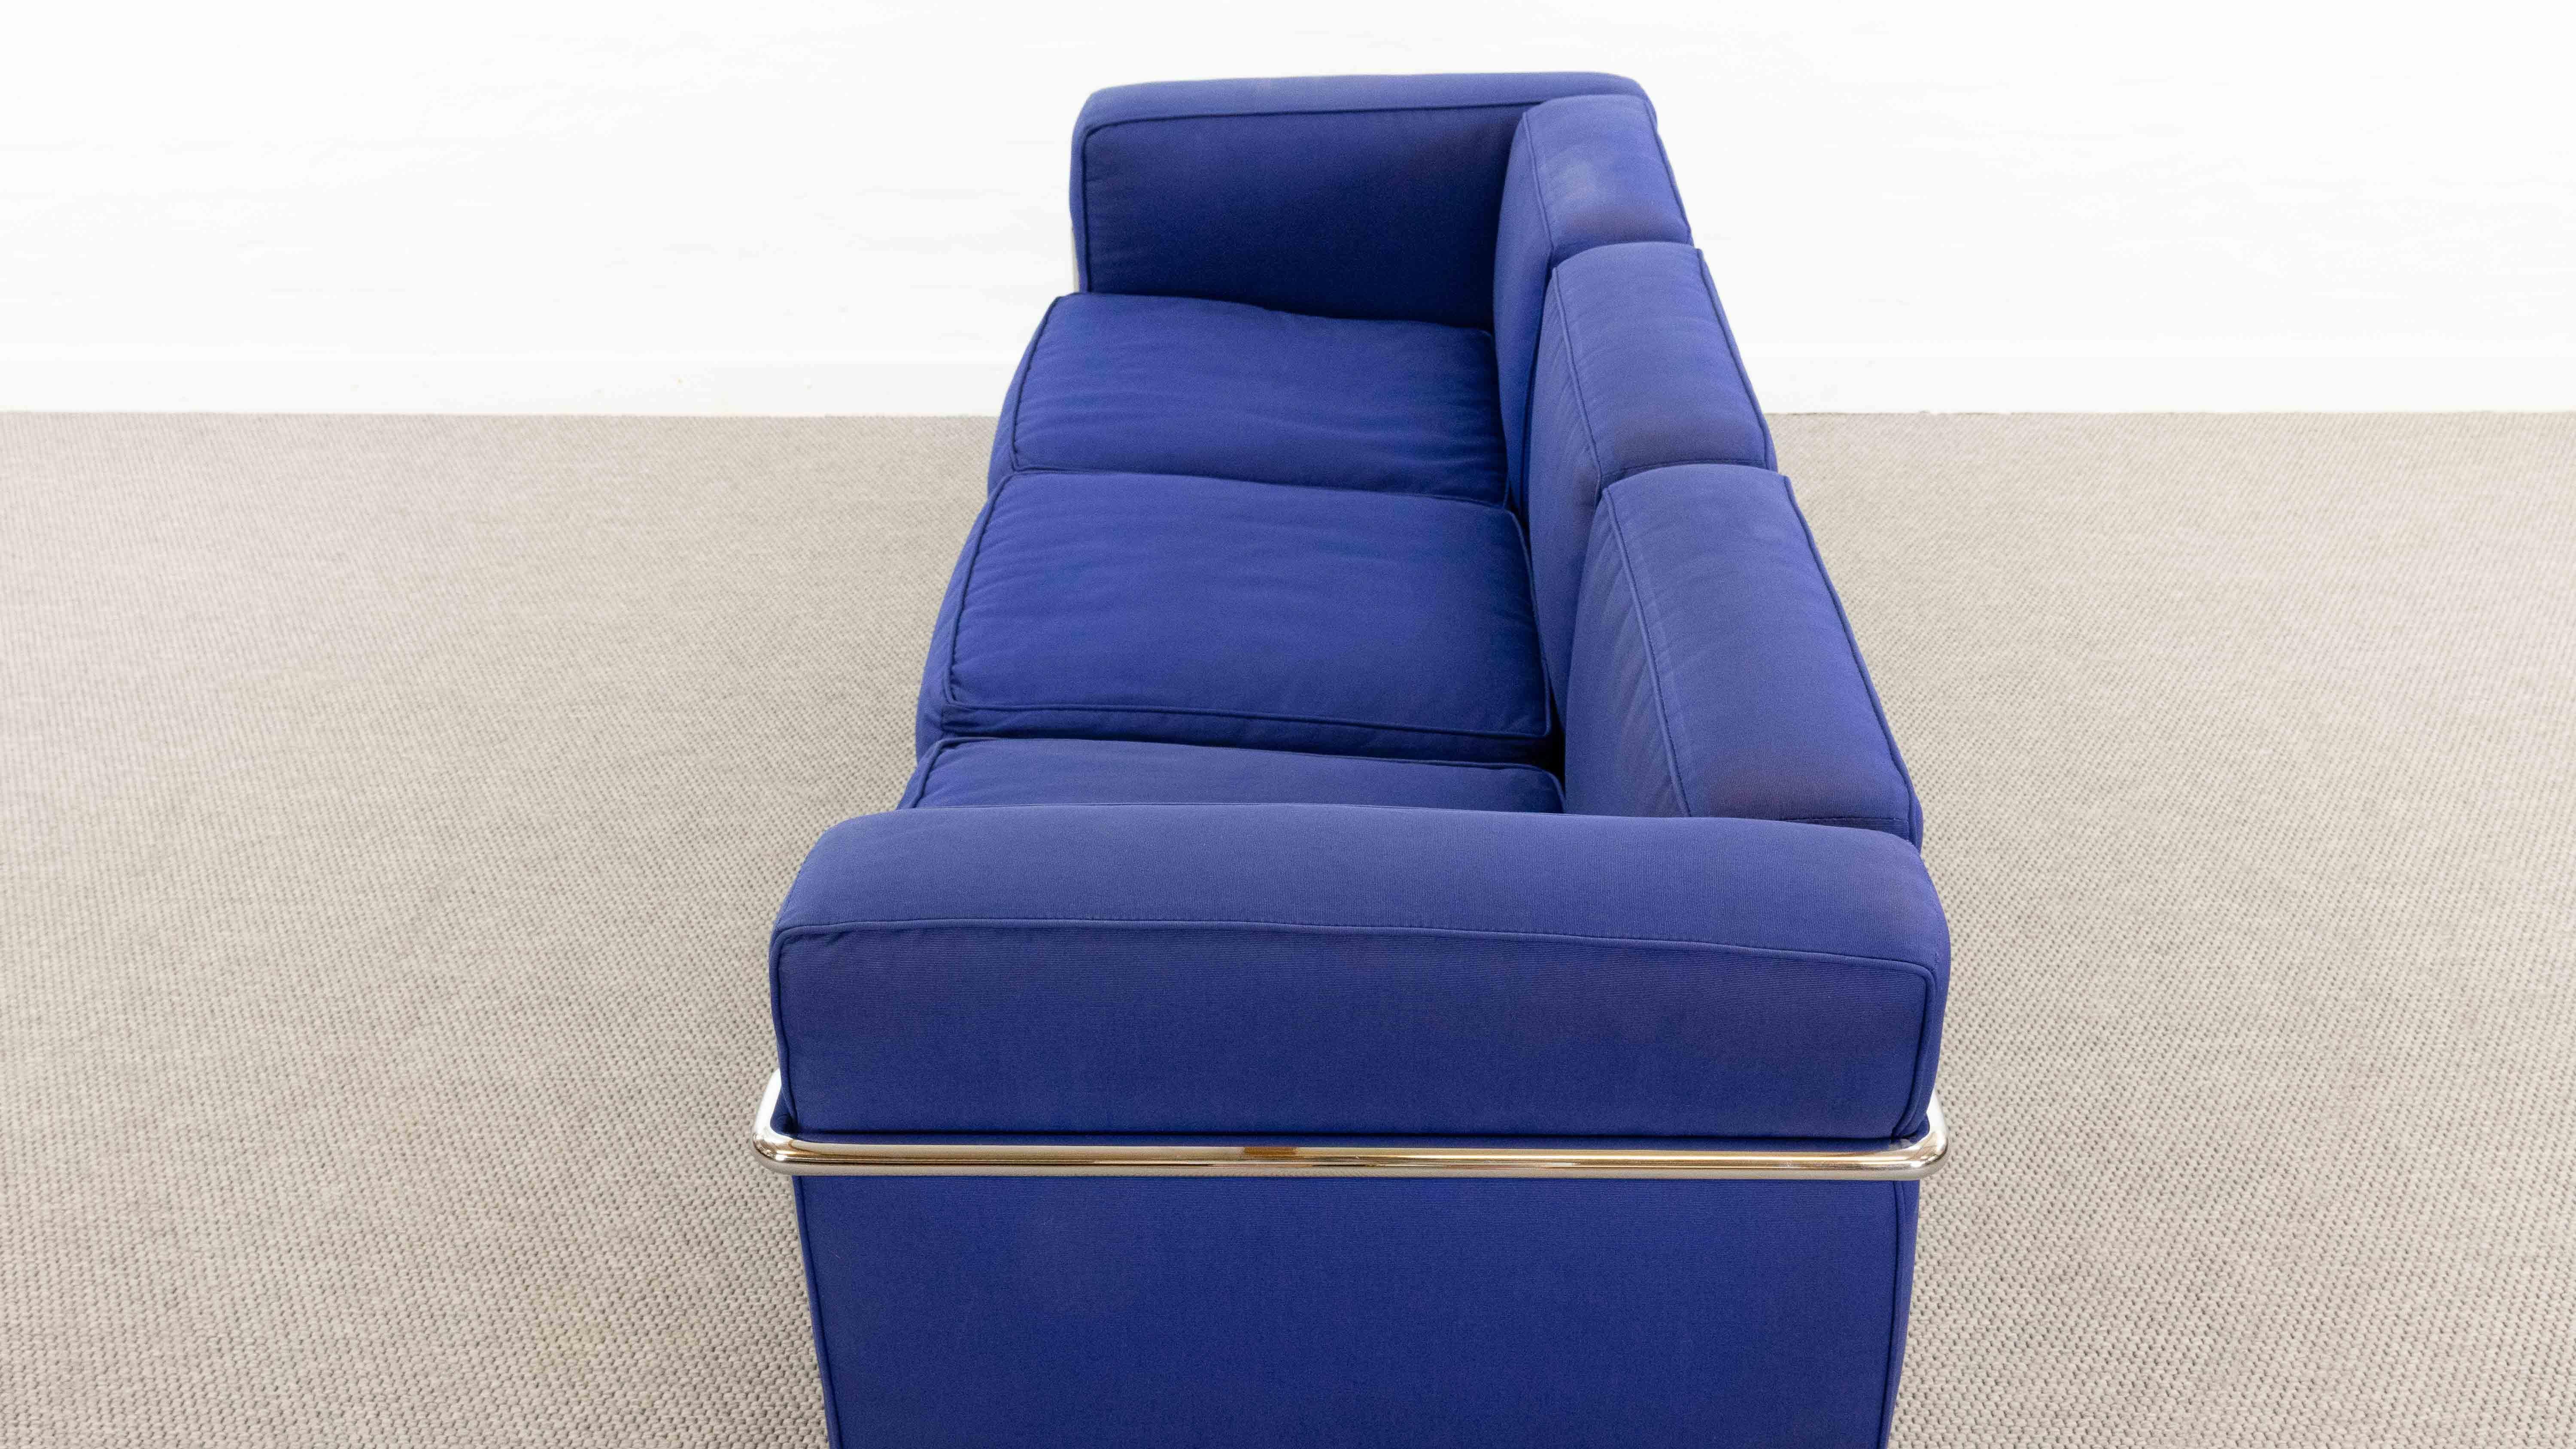 Cassina Lc2 3seat Sofa by Charlotte Perriand and Le Corbusier in Blue Fabrics 1